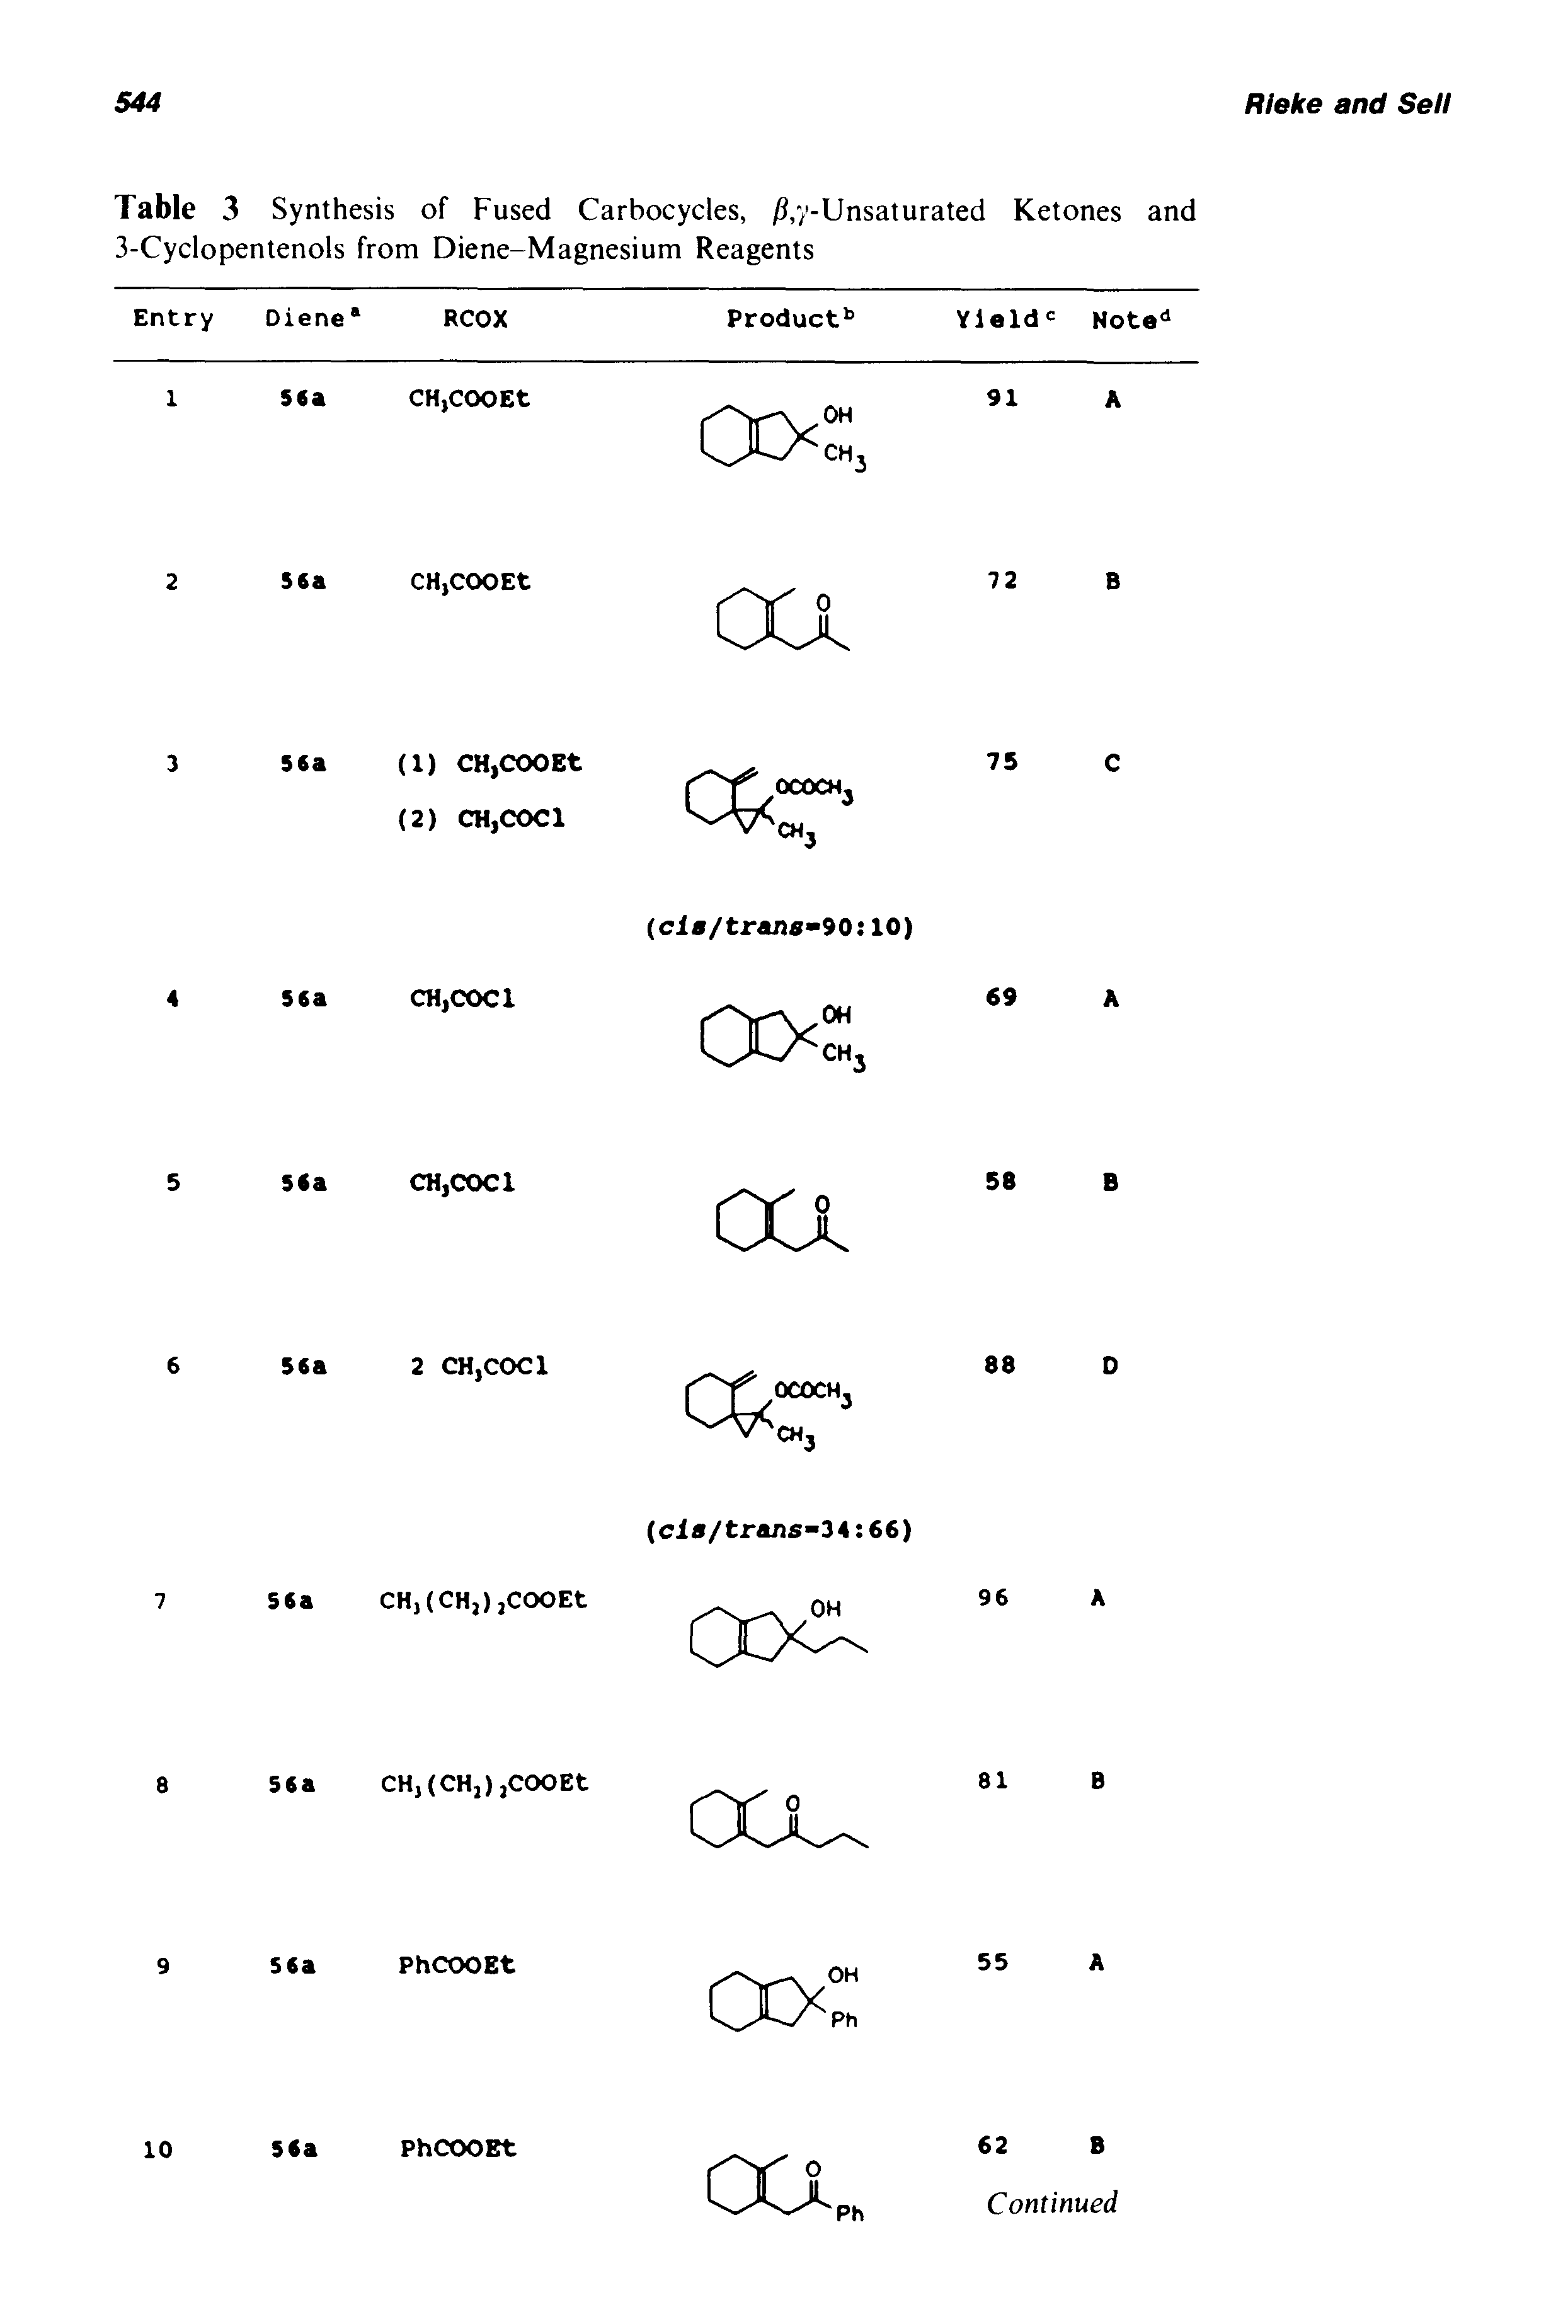 Table 3 Synthesis of Fused Carbocycles, j5,y-Unsaturated Ketones and 3-Cyclopentenols from Diene-Magnesium Reagents...